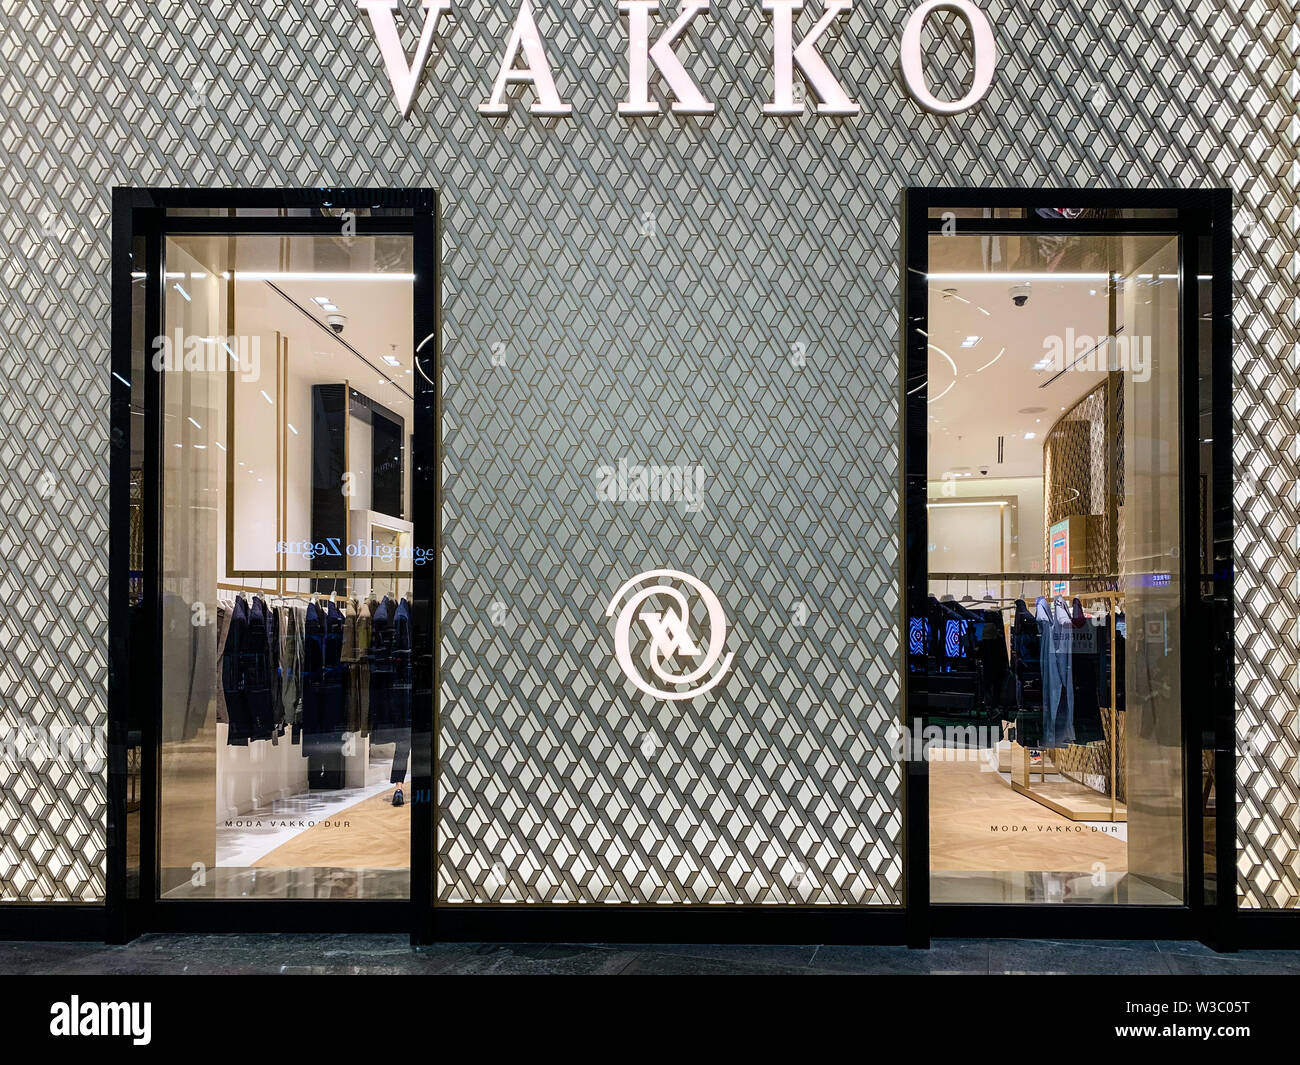 Vakko shop front, selling high goods Vakko is a Turkish fashion company. It produces and retails textile, leather goods and accessories. Istanbul/ Tur Stock Photo